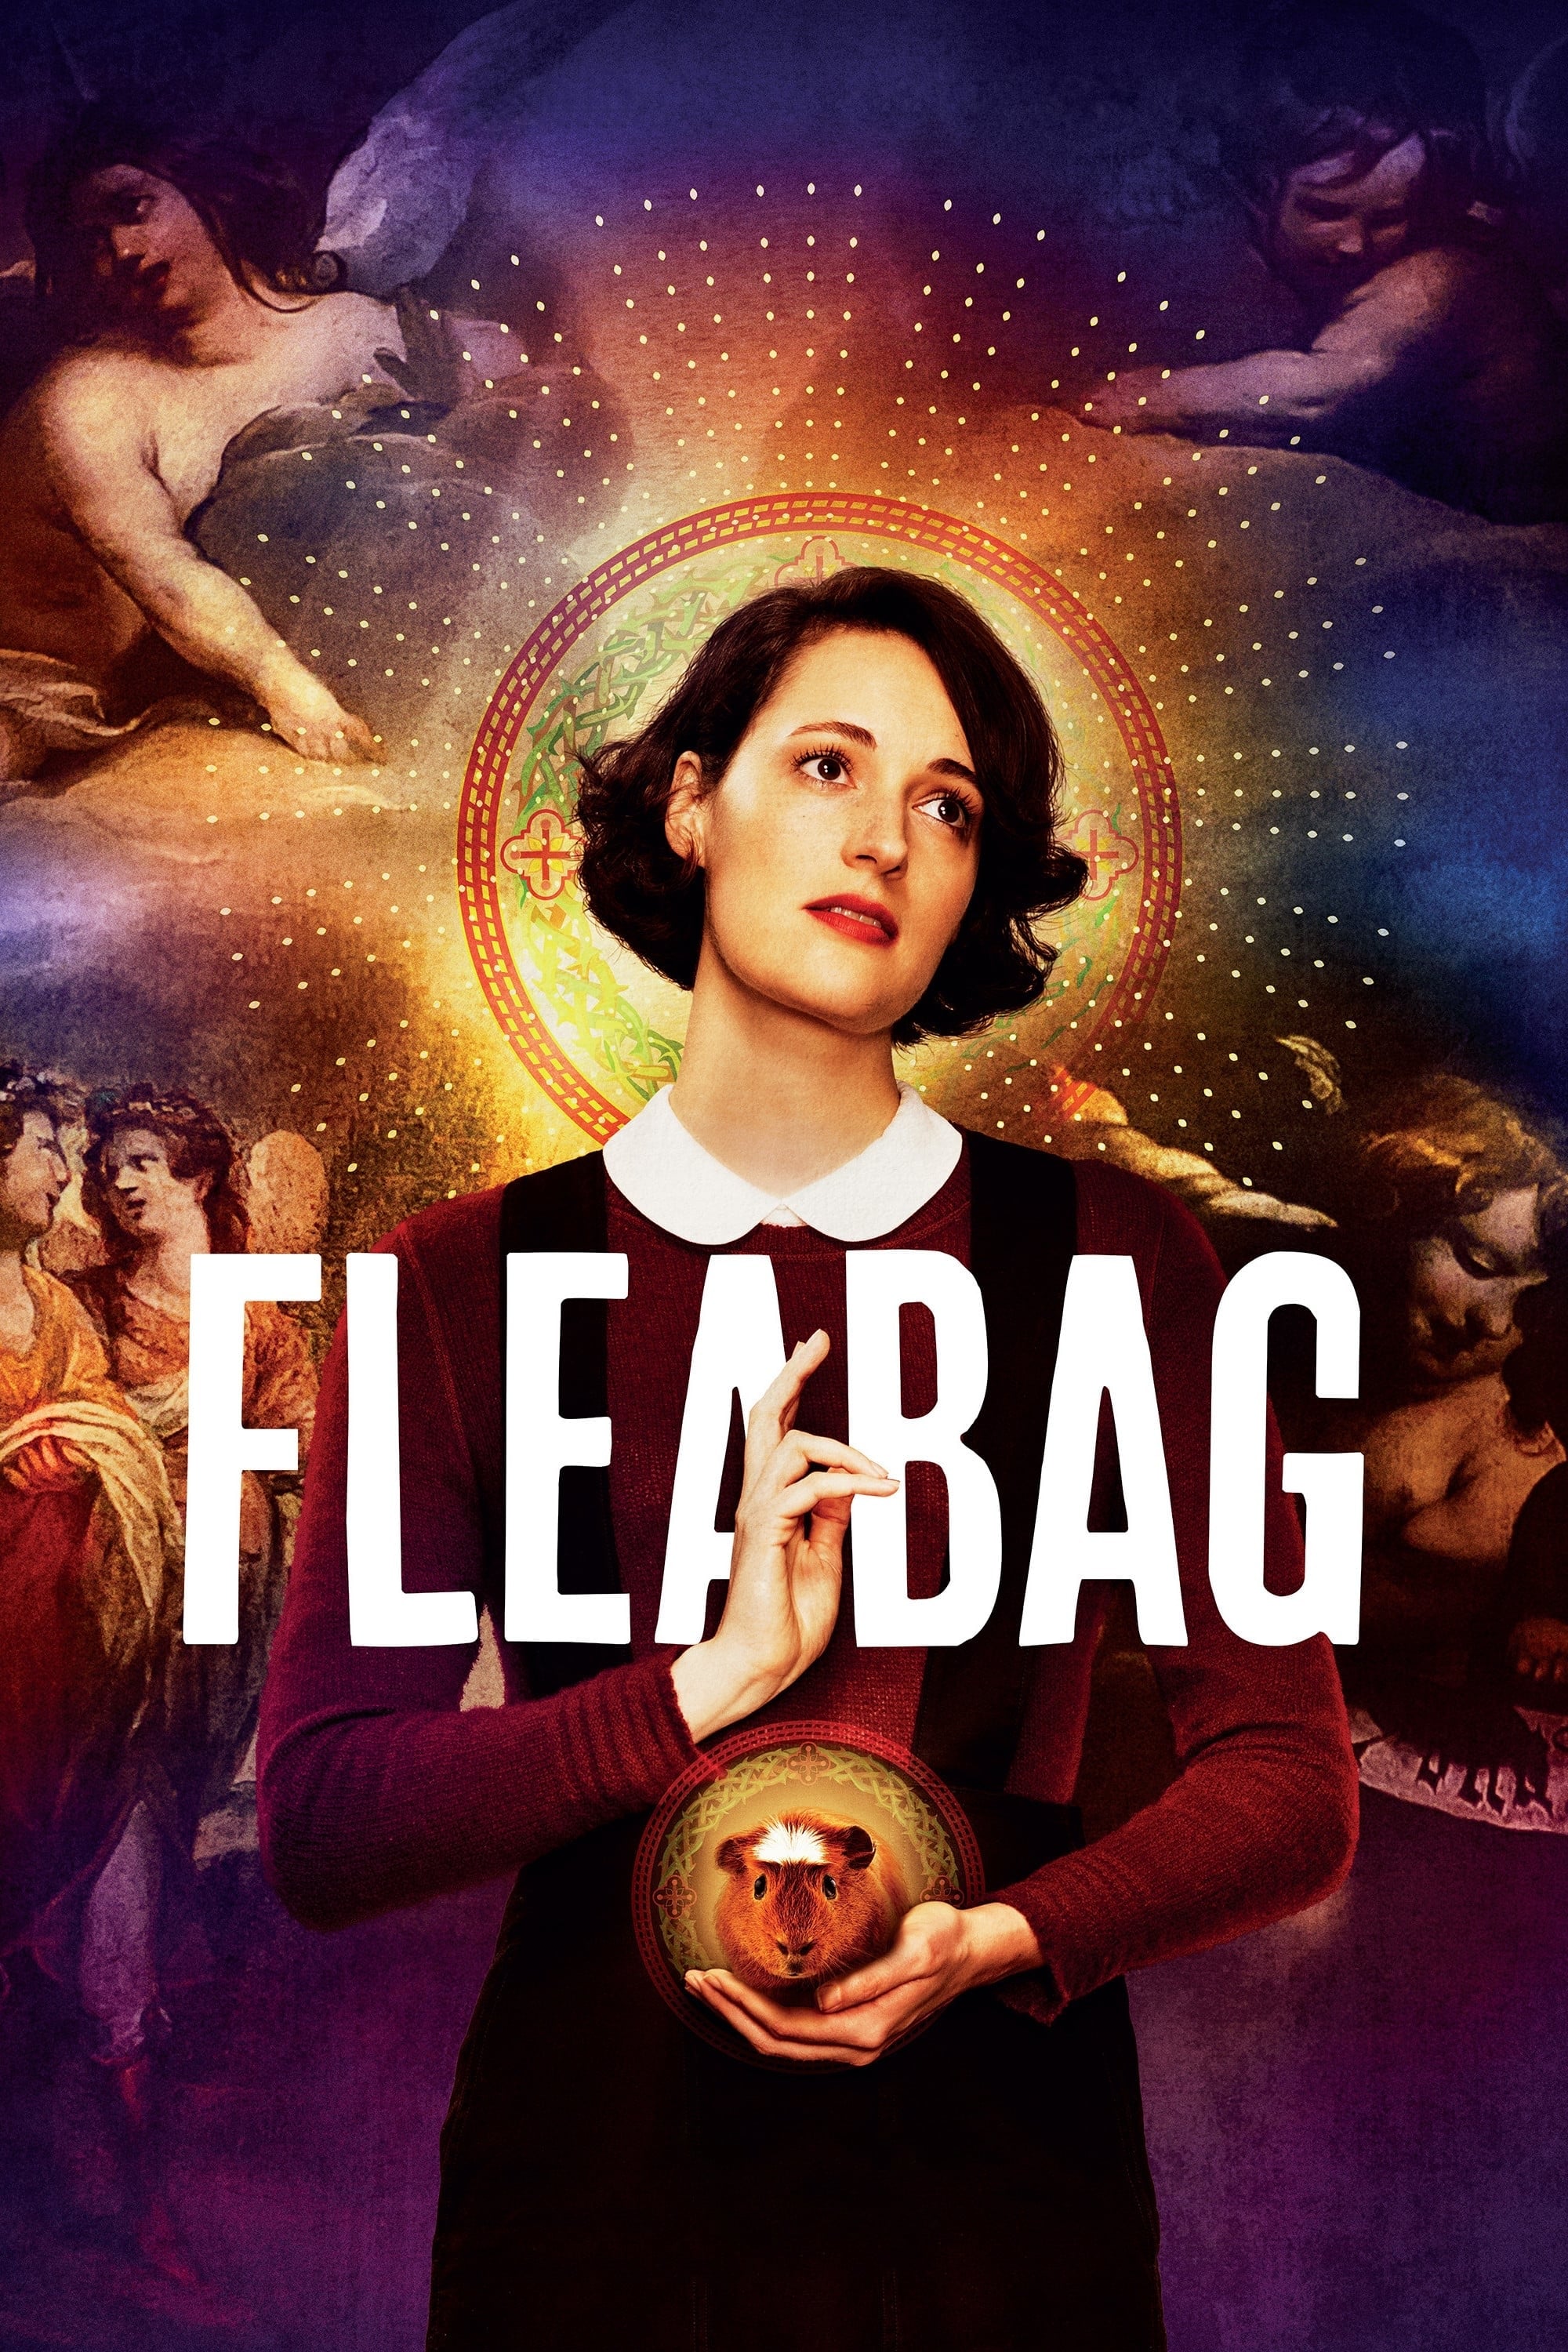 Fleabag TV Shows About Breaking The Fourth Wall